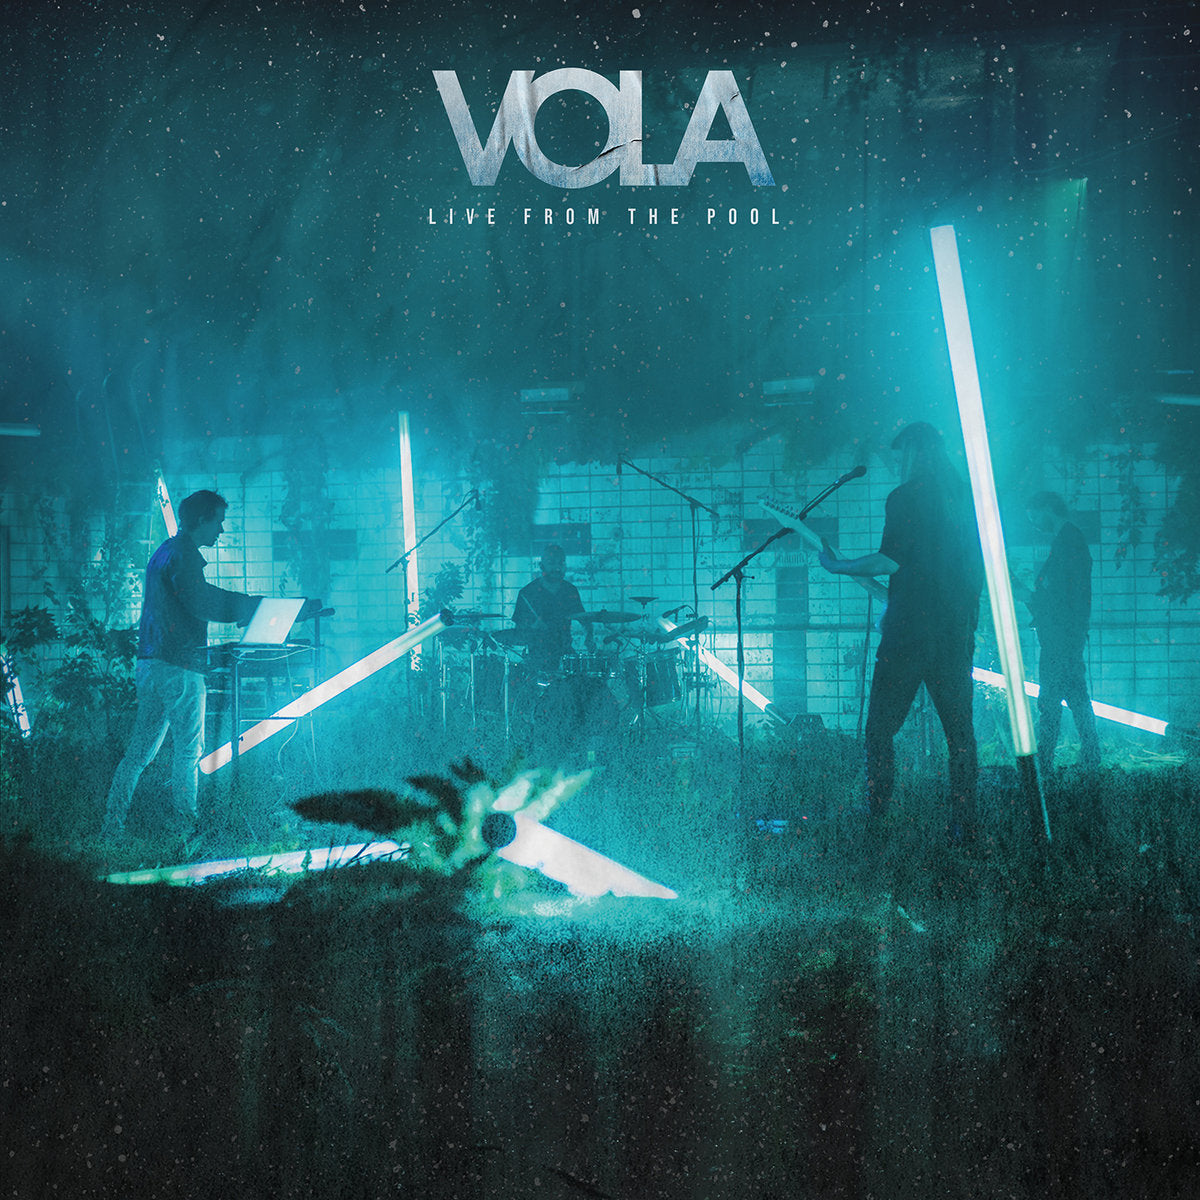 Vola "Live From The Pool" CD